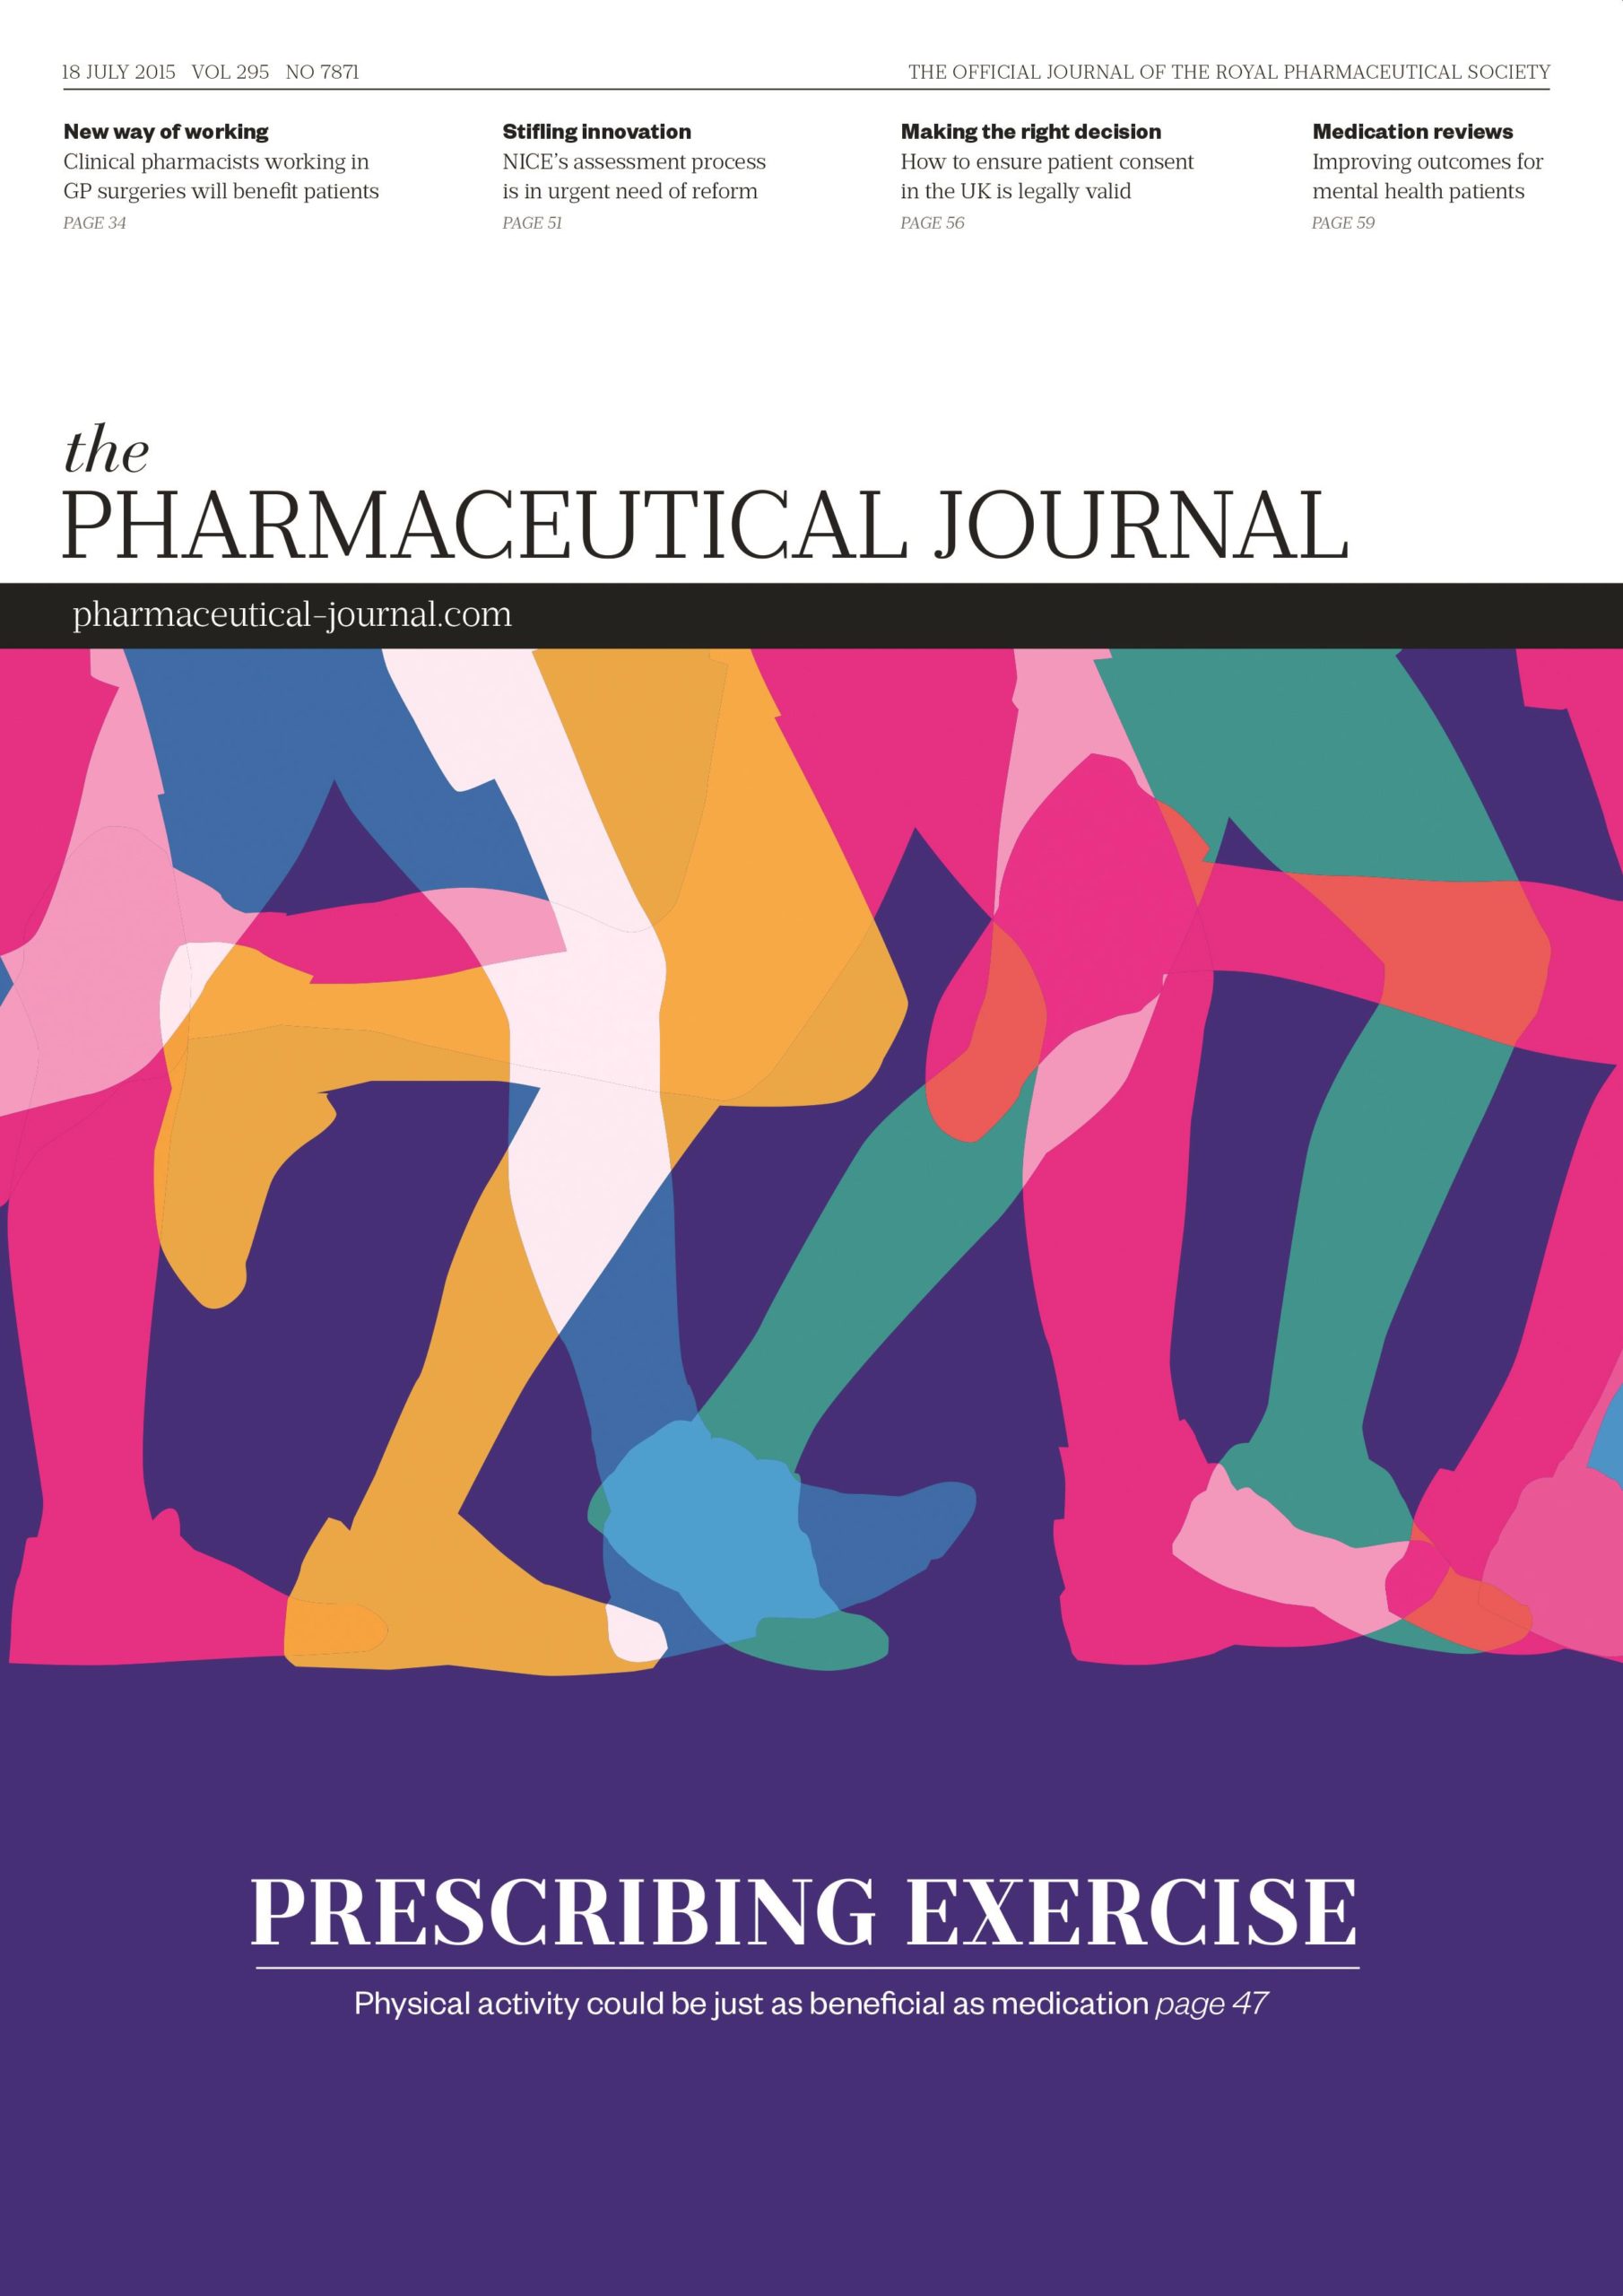 Publication issue cover for PJ, 18 July 2015, Vol 295, No 7871